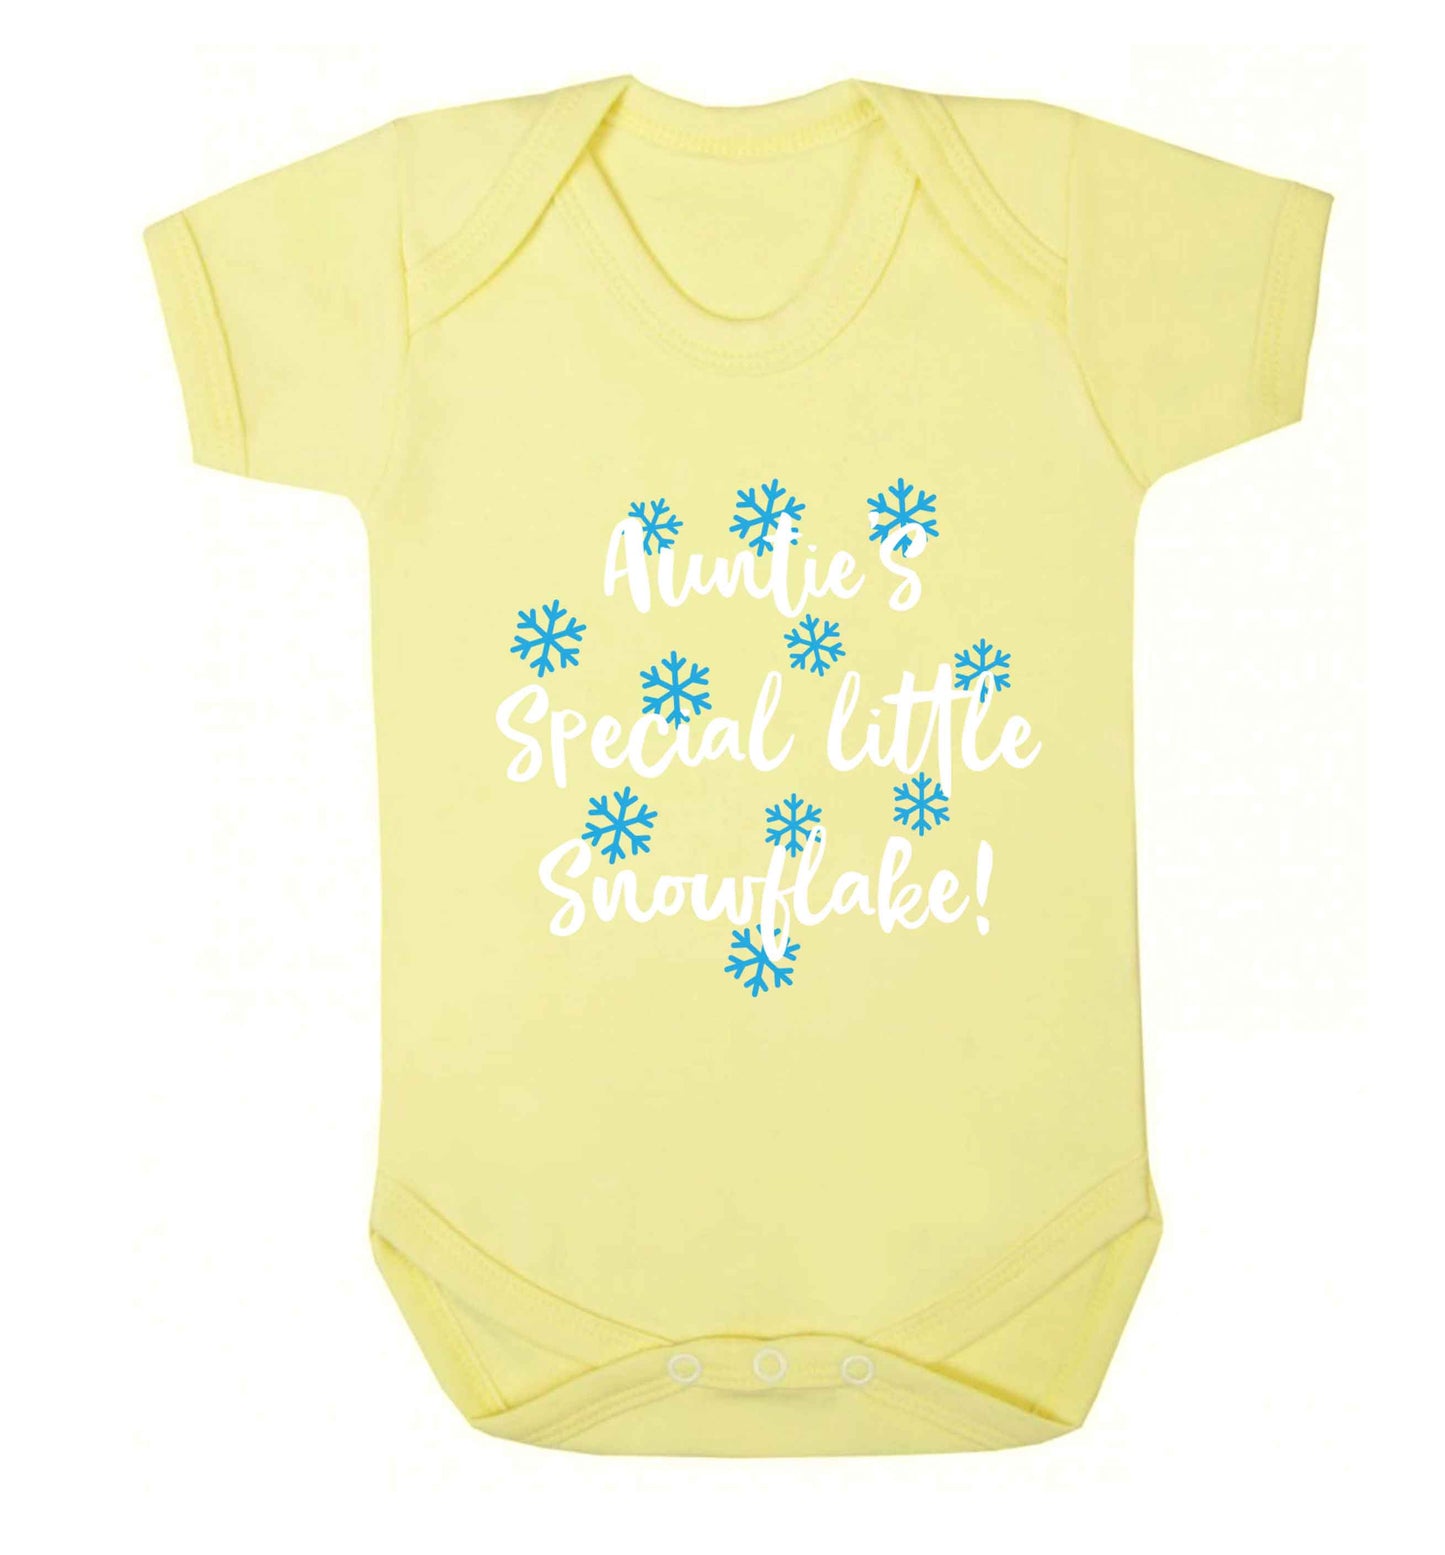 Auntie's special little snowflake Baby Vest pale yellow 18-24 months